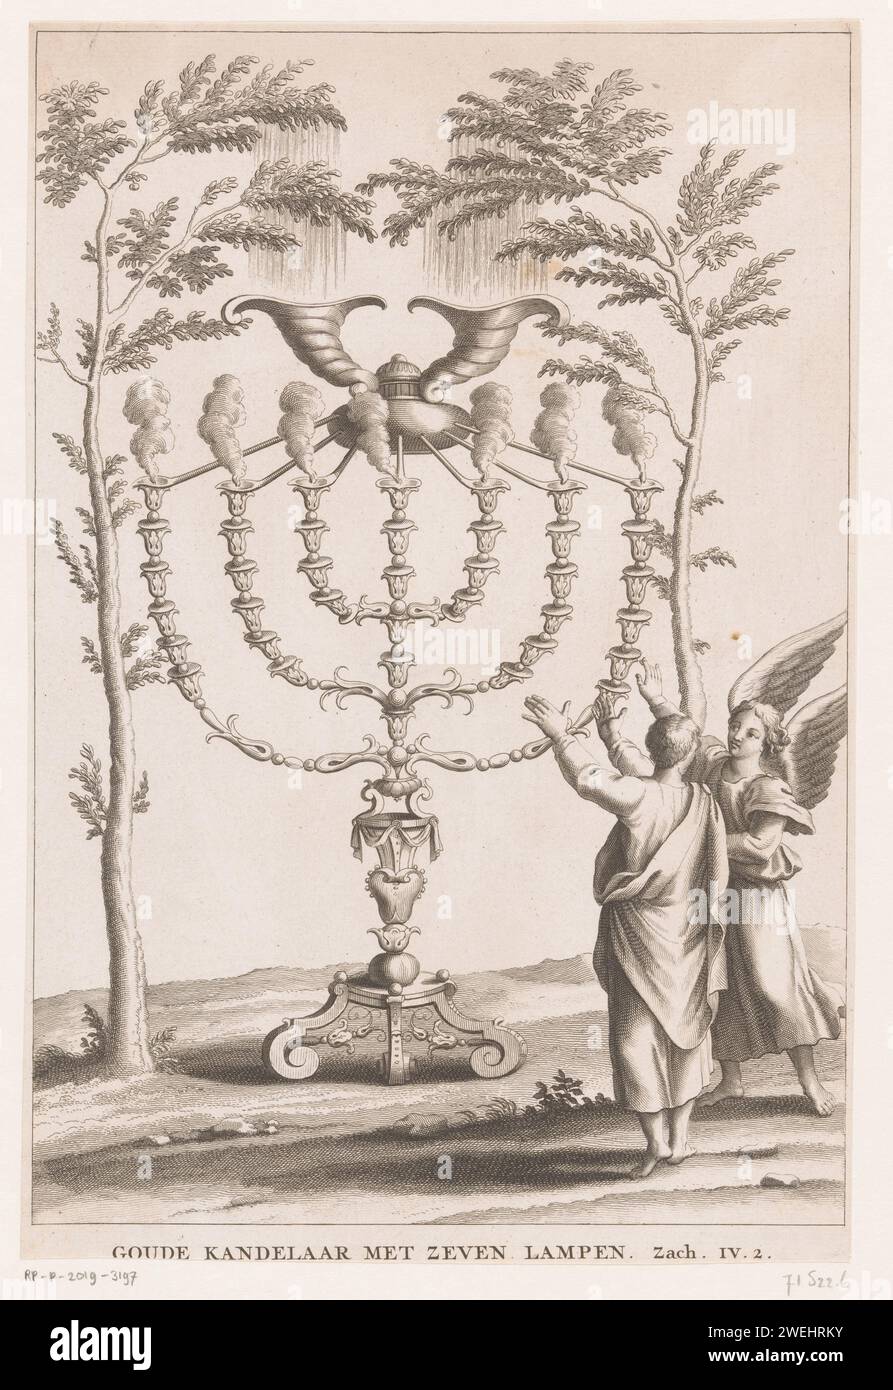 Two angels at a candlestick with seven lamps, Anonymous, 1725 - 1731 print   paper engraving / etching four chariots (with red, black, white, grisled and bay horses respectively) coming out from between two mountains of brass (Zechariah 6:1-8). candlestick. 'menorah', golden seven-branched candlestick, kept in the Tabernacle Stock Photo